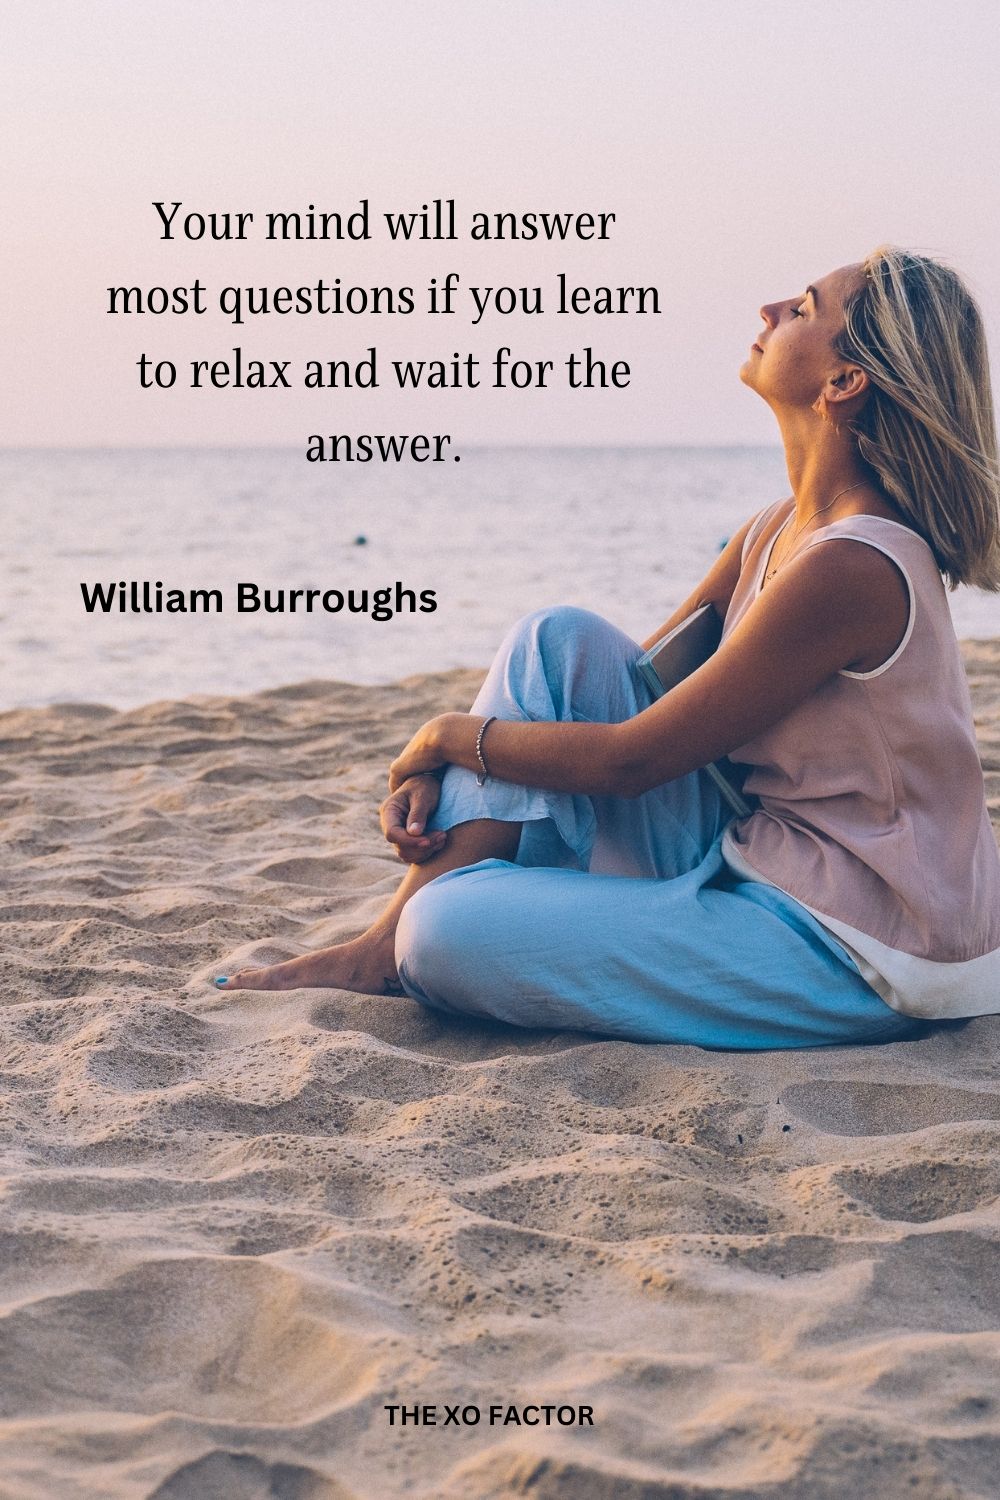 Your mind will answer most questions if you learn to relax and wait for the answer.
William Burroughs